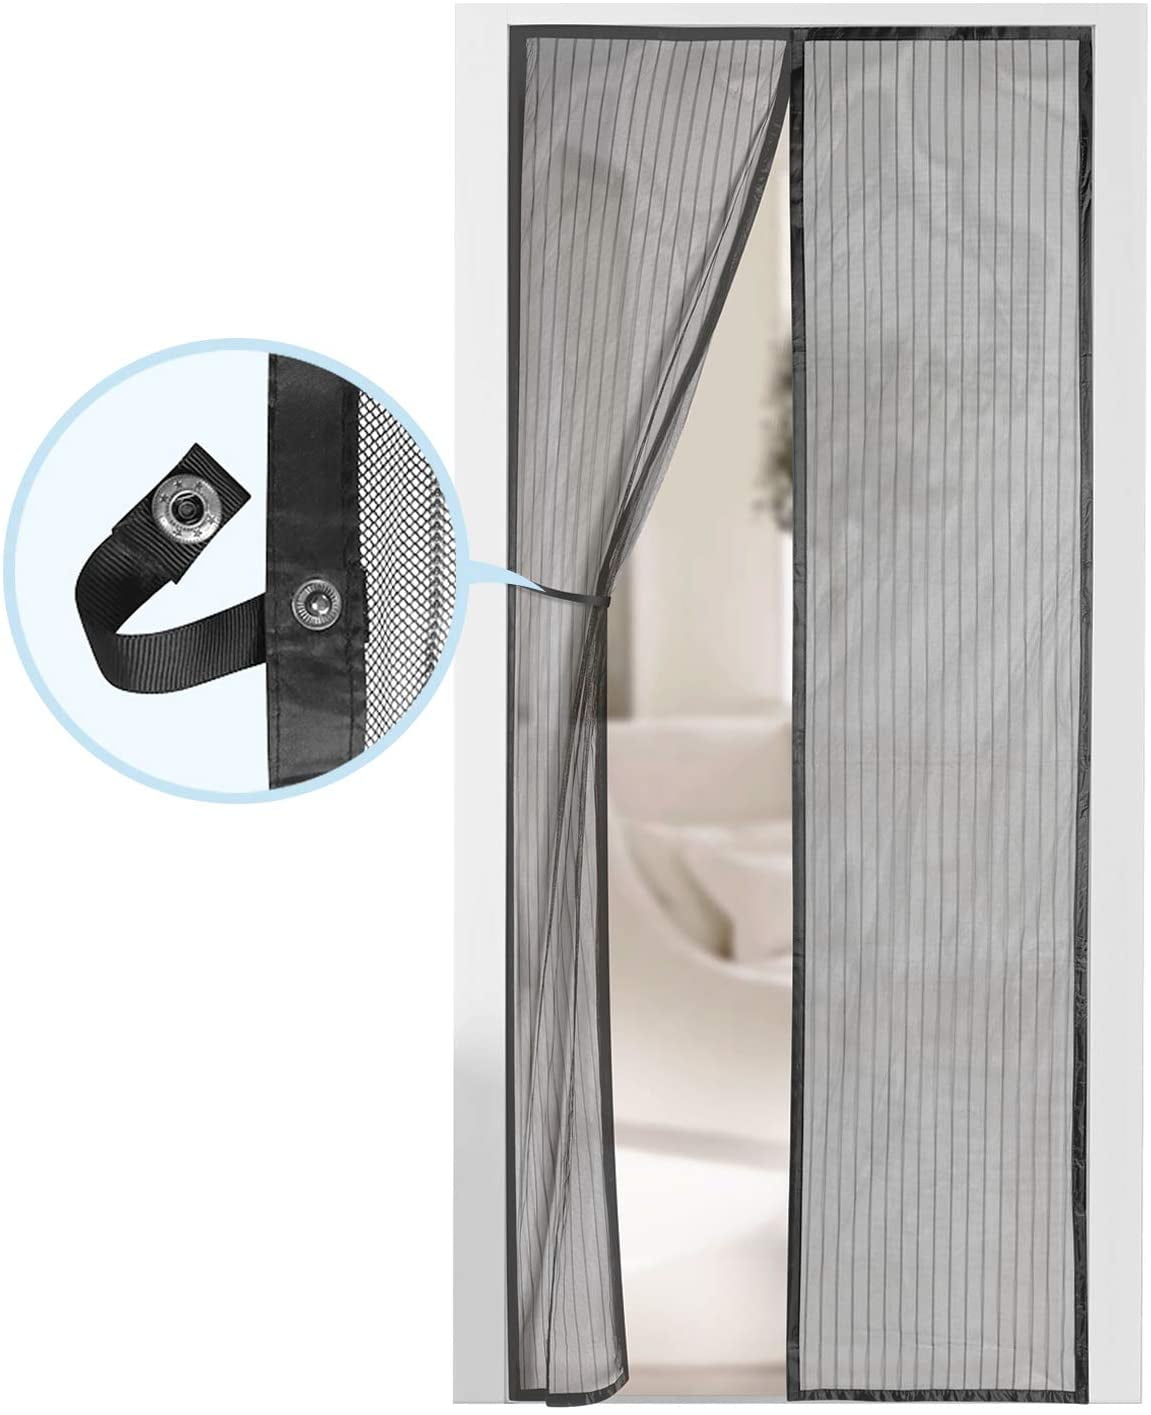 Insect Protection Door No Gap Heavy Duty Bug Mesh Curtain with Powerful Magnets and Full Frame Magic Tape Keep Bugs Out Lets Fresh Air in,120×210CM HXPH Magnetic Fly Screen Door